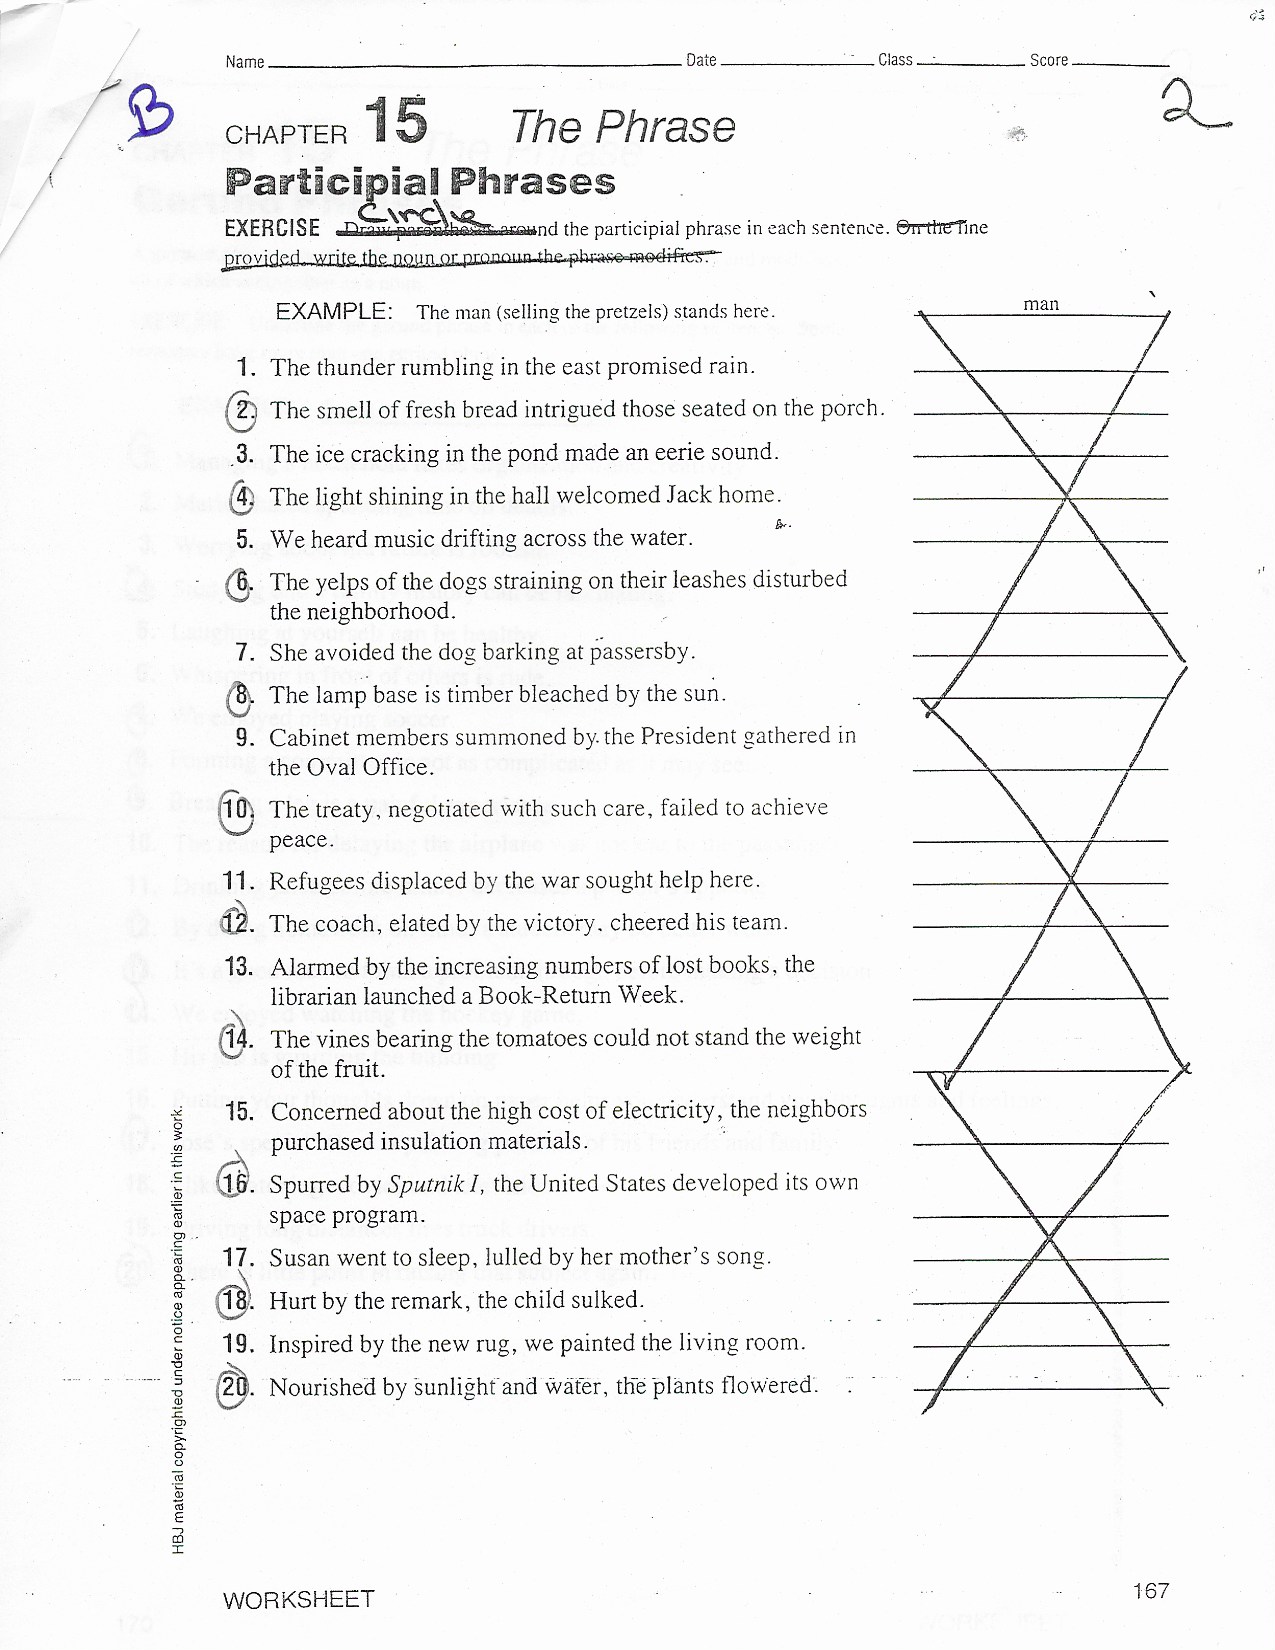 participial-phrase-worksheet-with-answers-free-download-goodimg-co